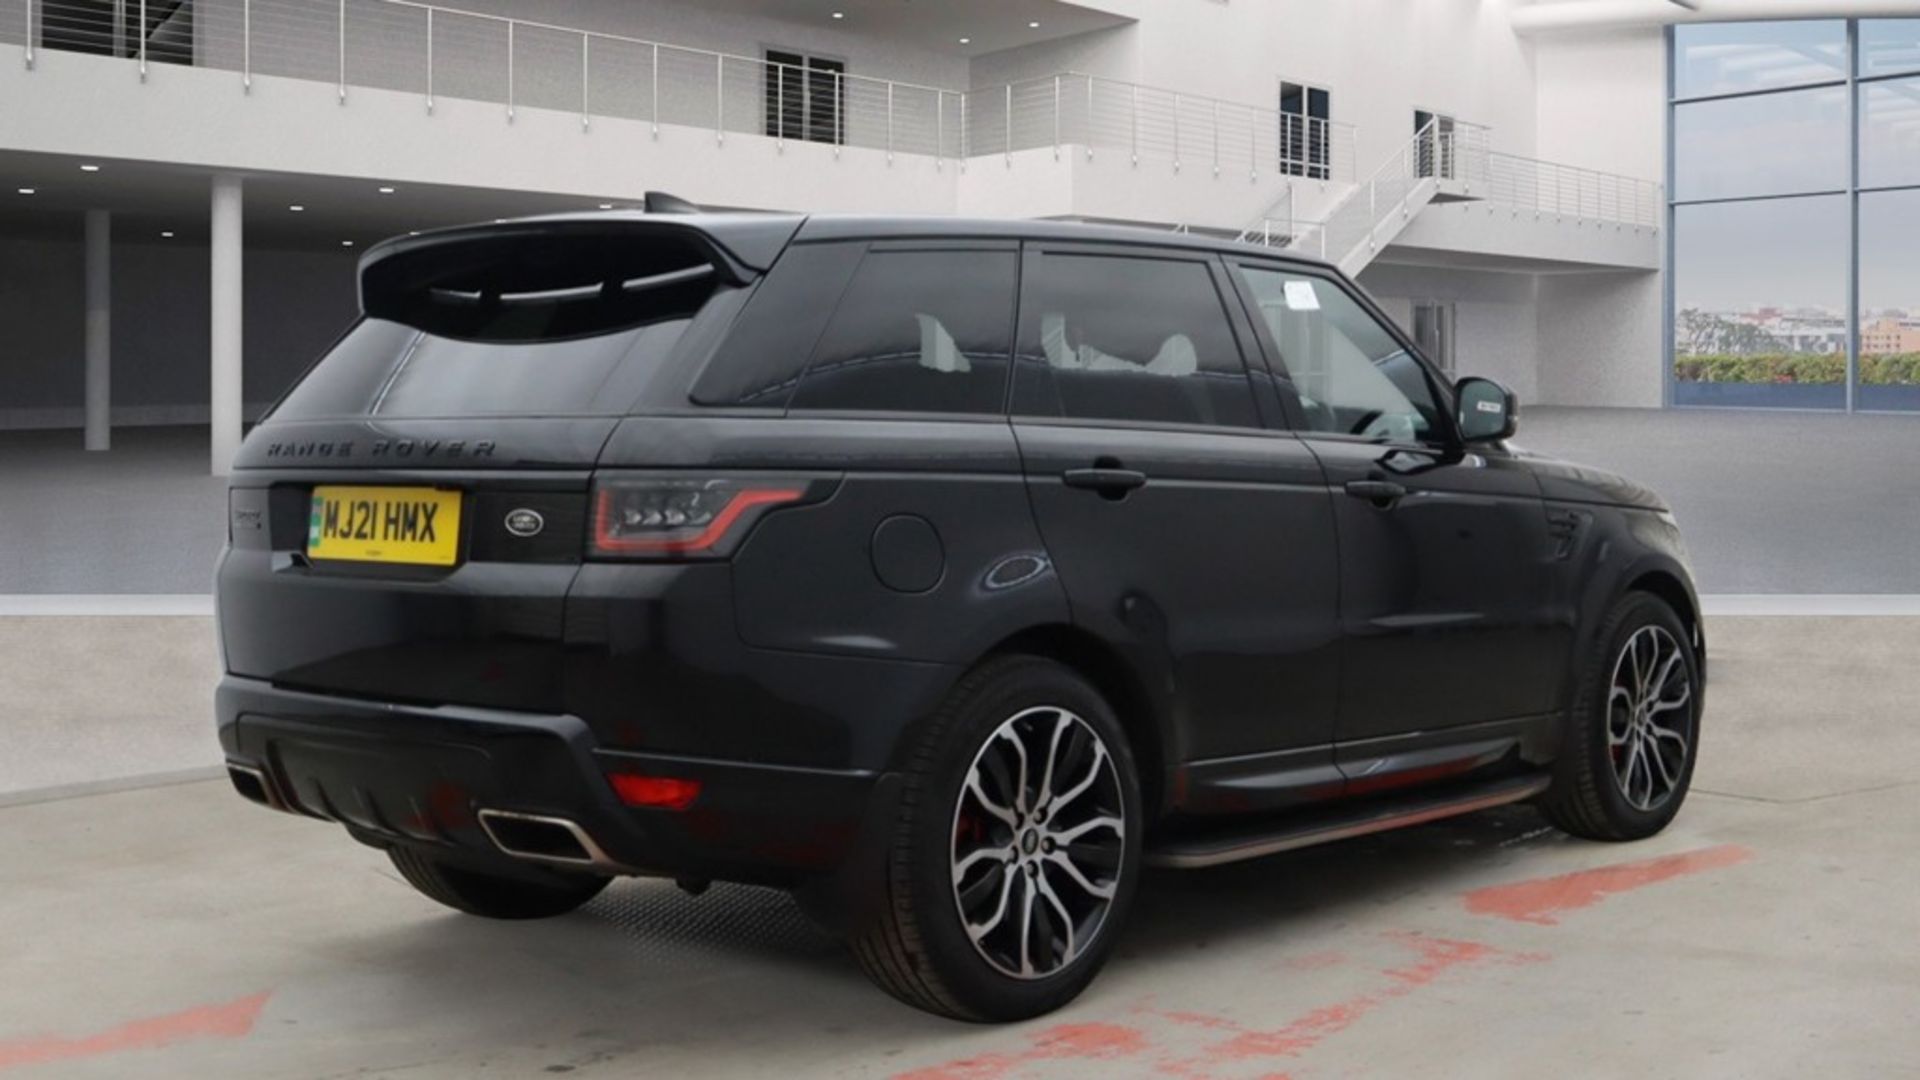 ** ON SALE ** Land Rover Range Rover Sport 2.0 P400E Autobiography Dynamic 2021'21 Reg' - Image 5 of 9